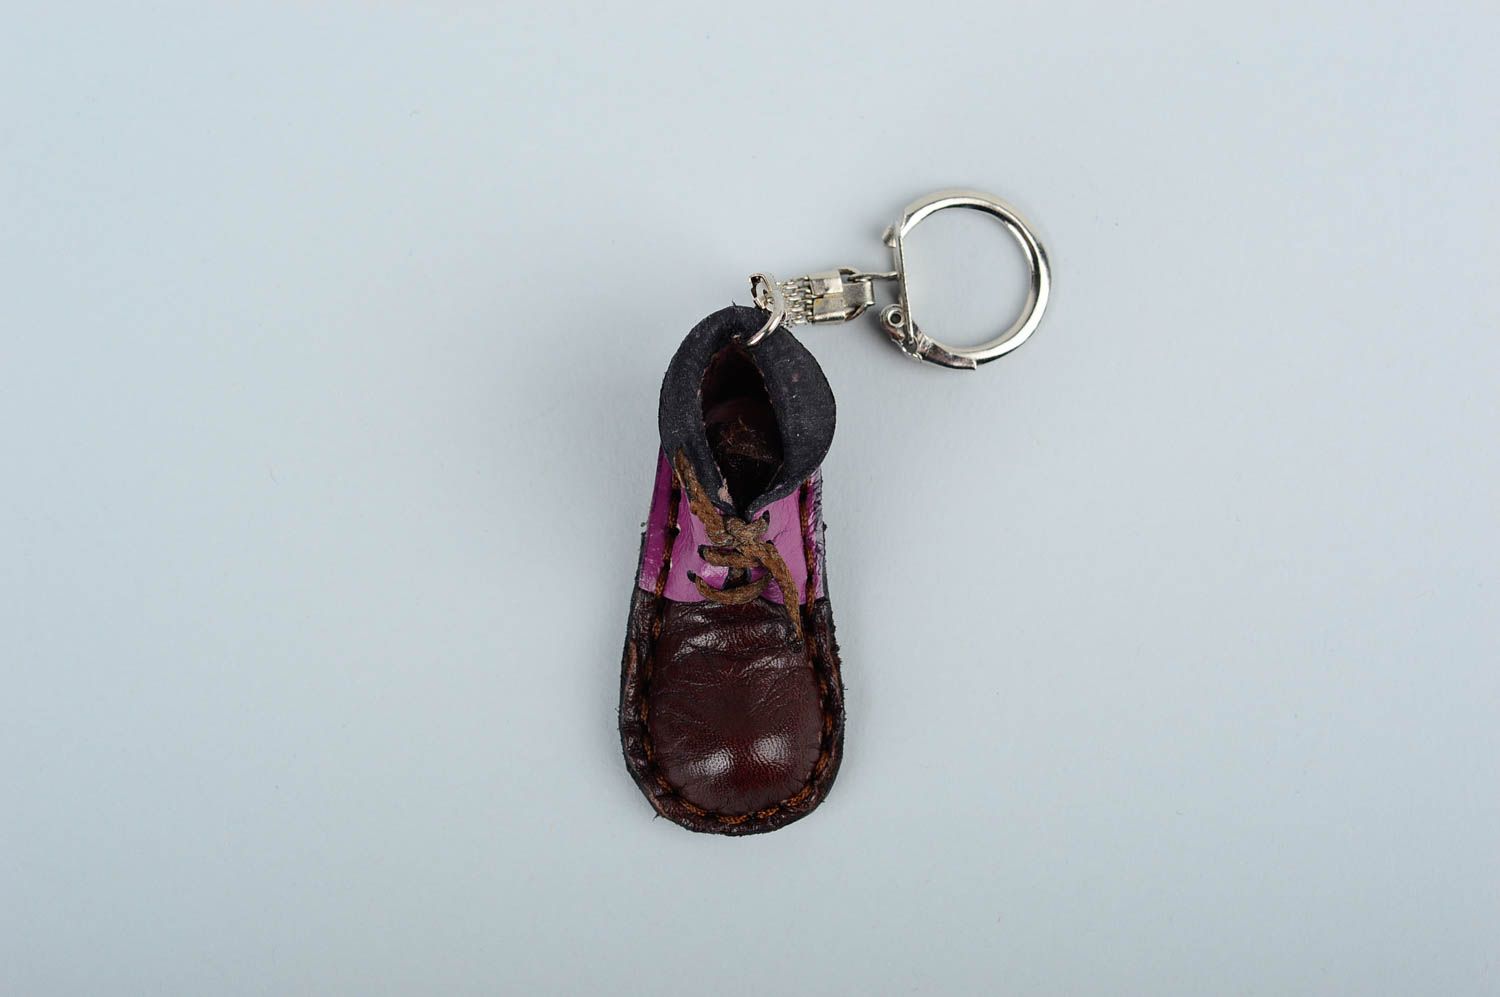 Stylish handmade leather keychain cool keyrings leather goods small gifts photo 4